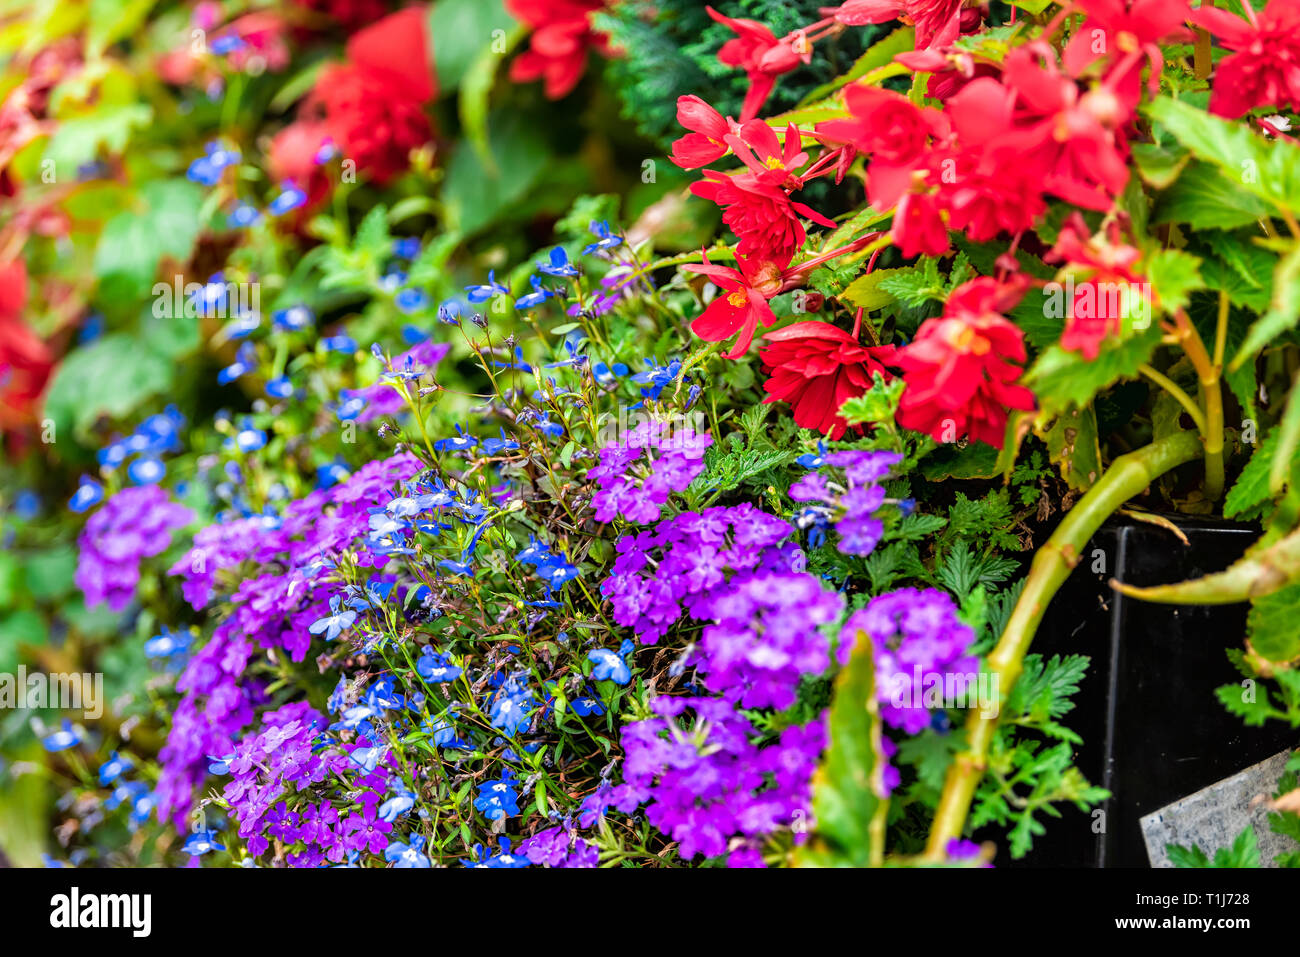 Many colorful tiny purple and blue small flowers with green leaves hanging in pot in garden or florist shop with lobelia and heliotrope Stock Photo